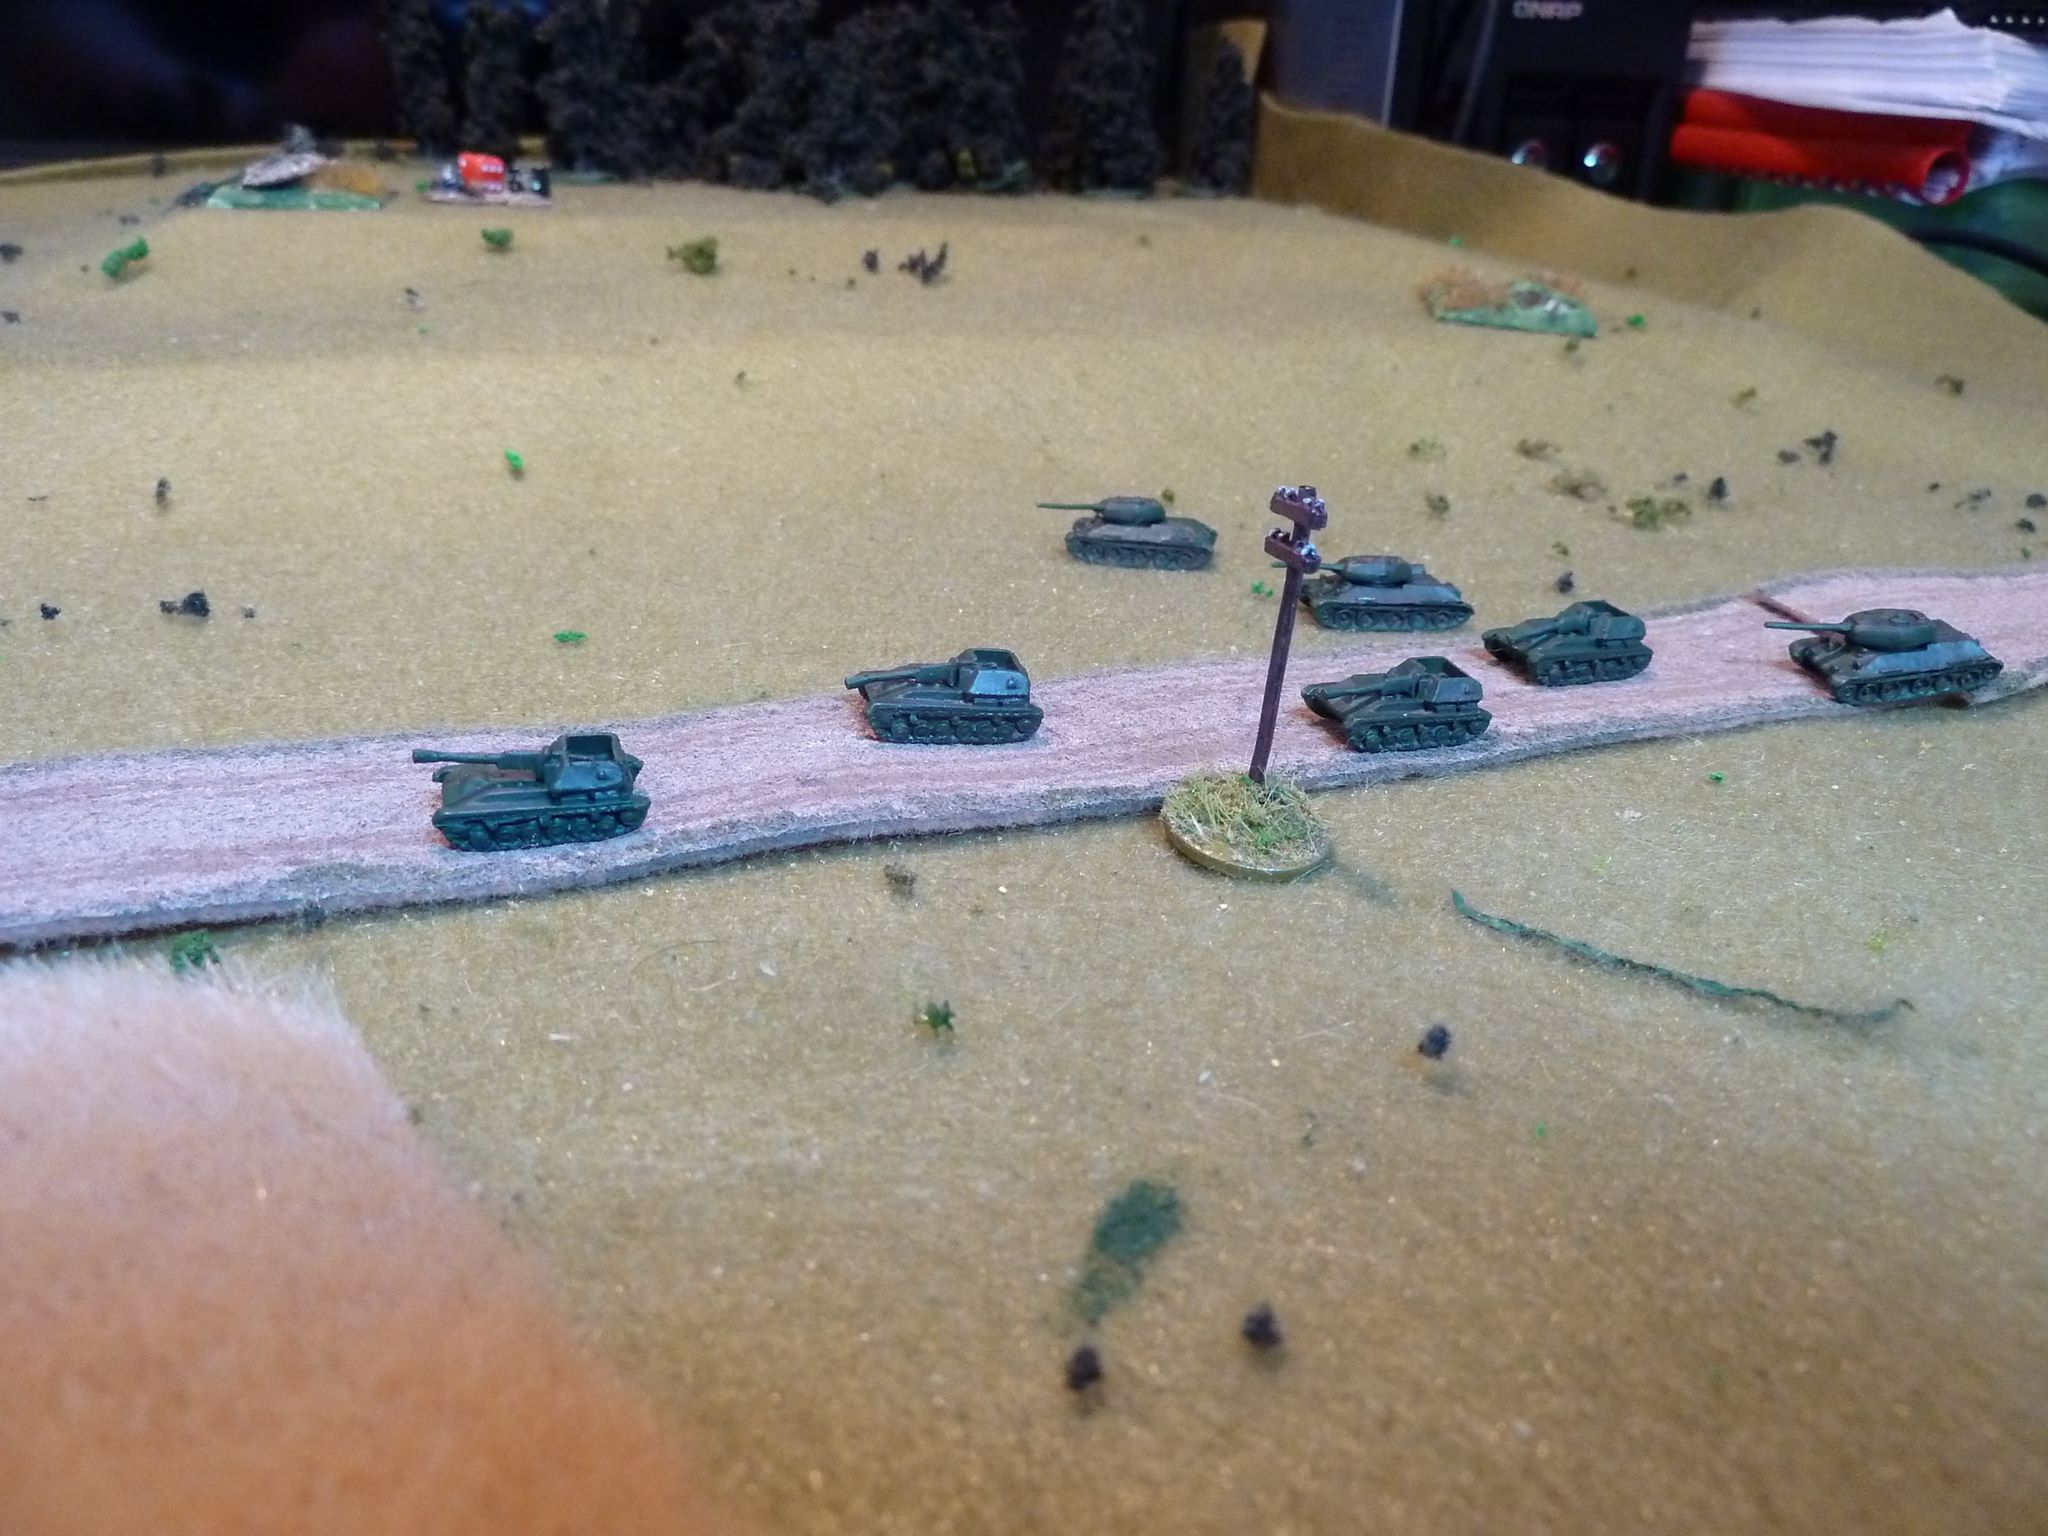  The T-34/85s arrive on the table and dash forward, catching up with the slow moving Su-76s. 